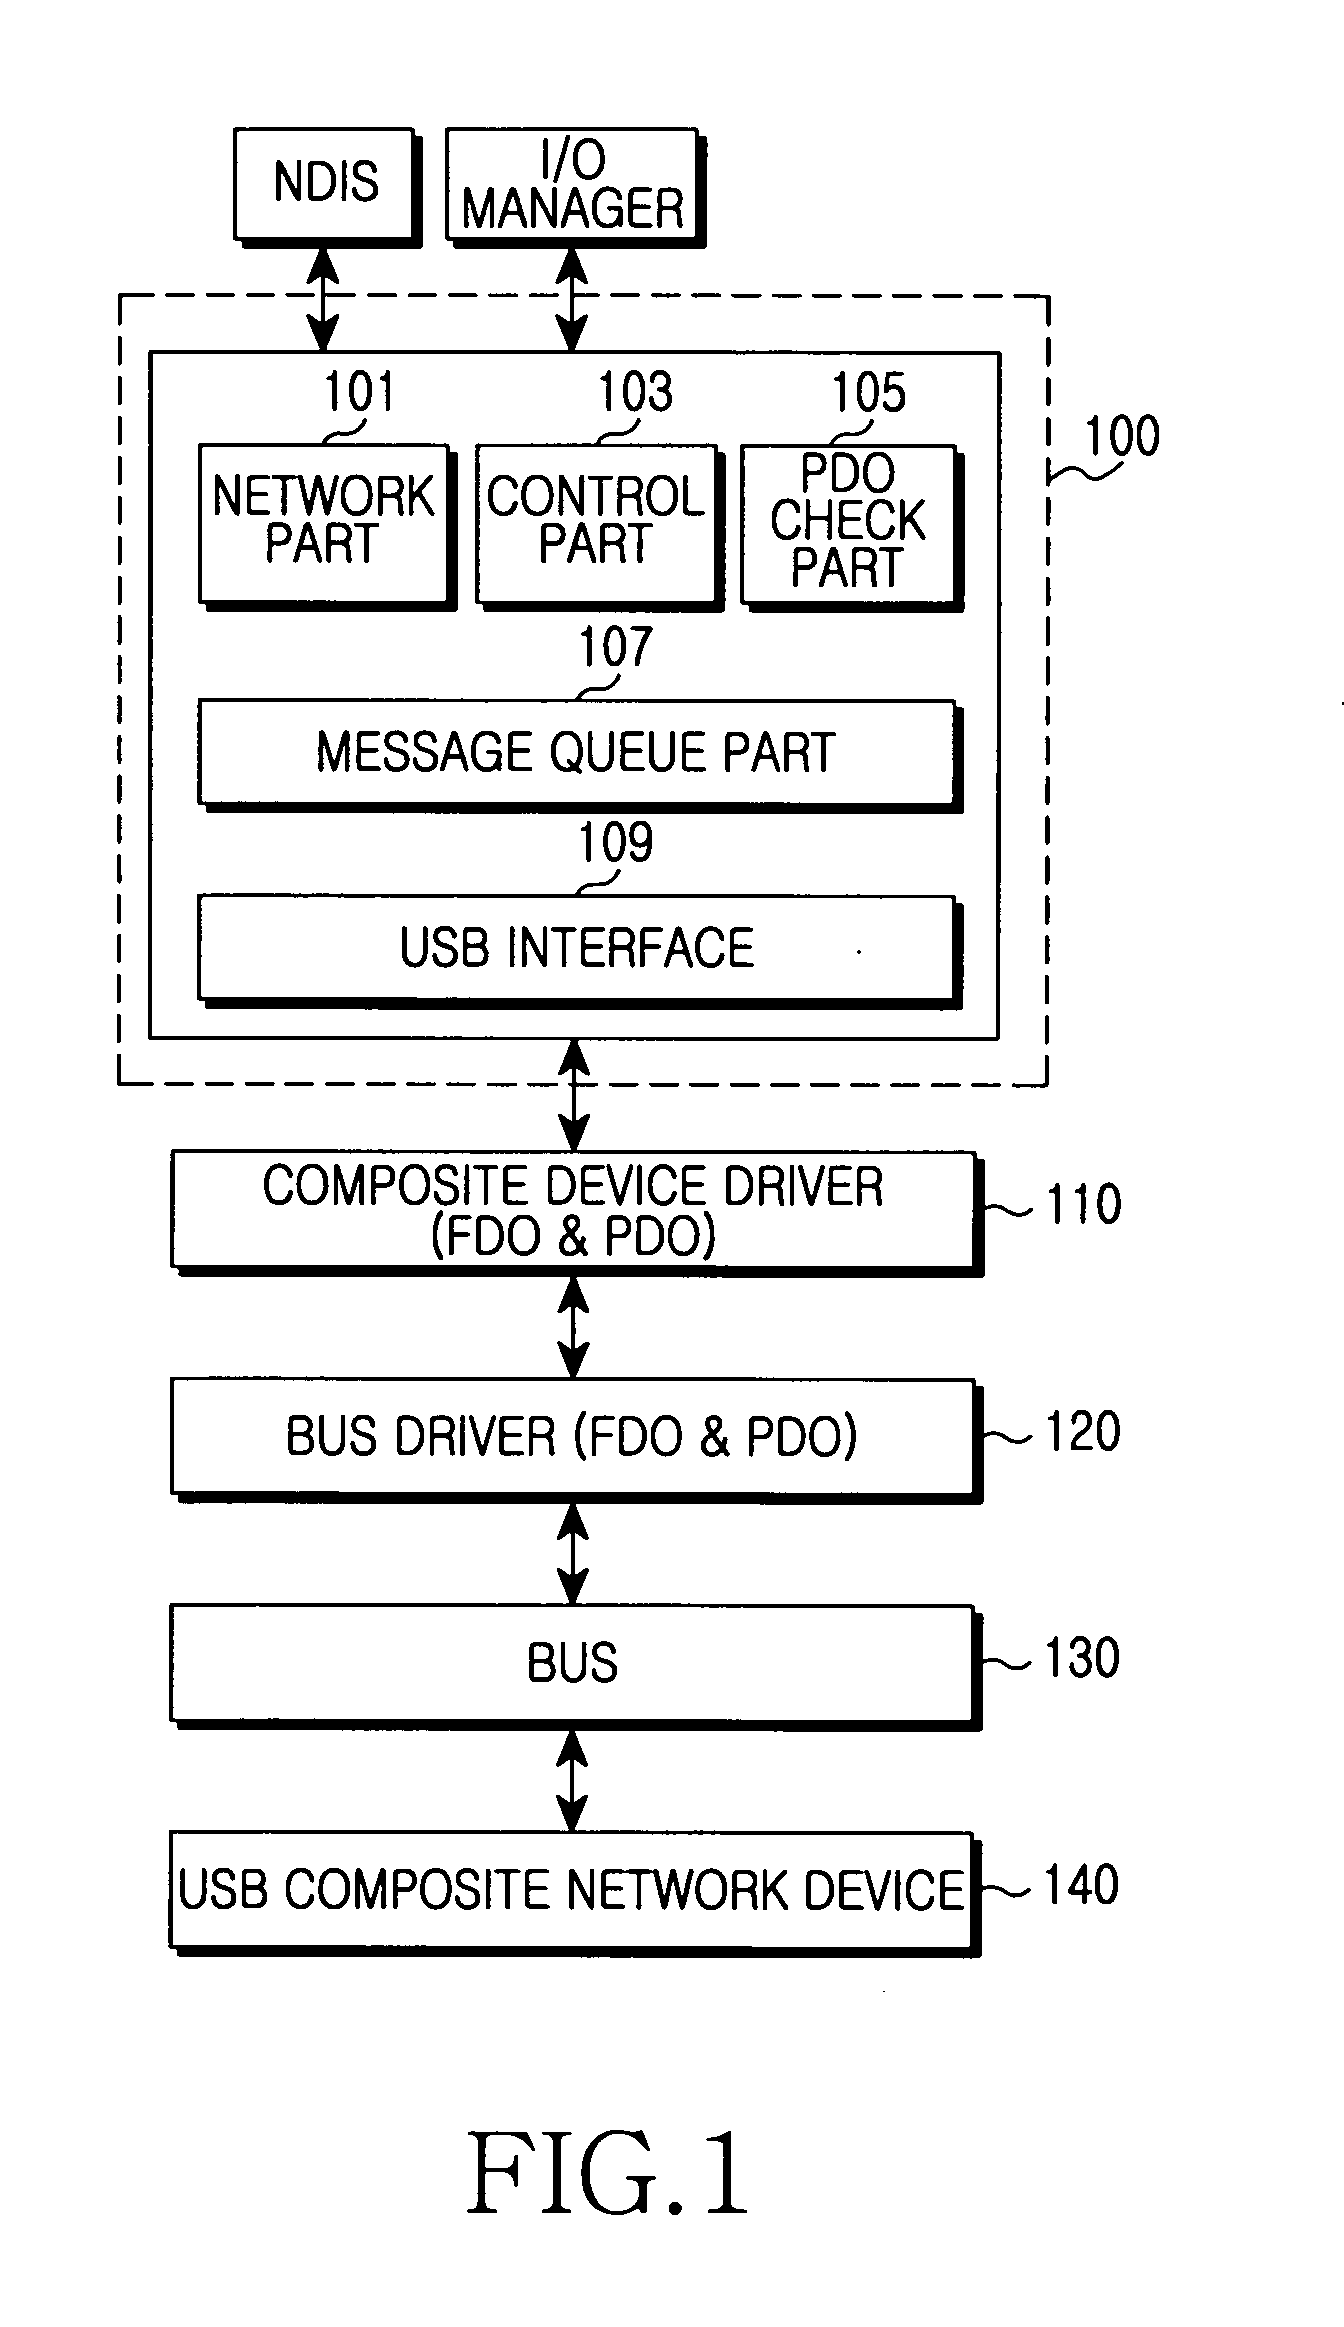 Apparatus and method for supporting suspend of composite network device